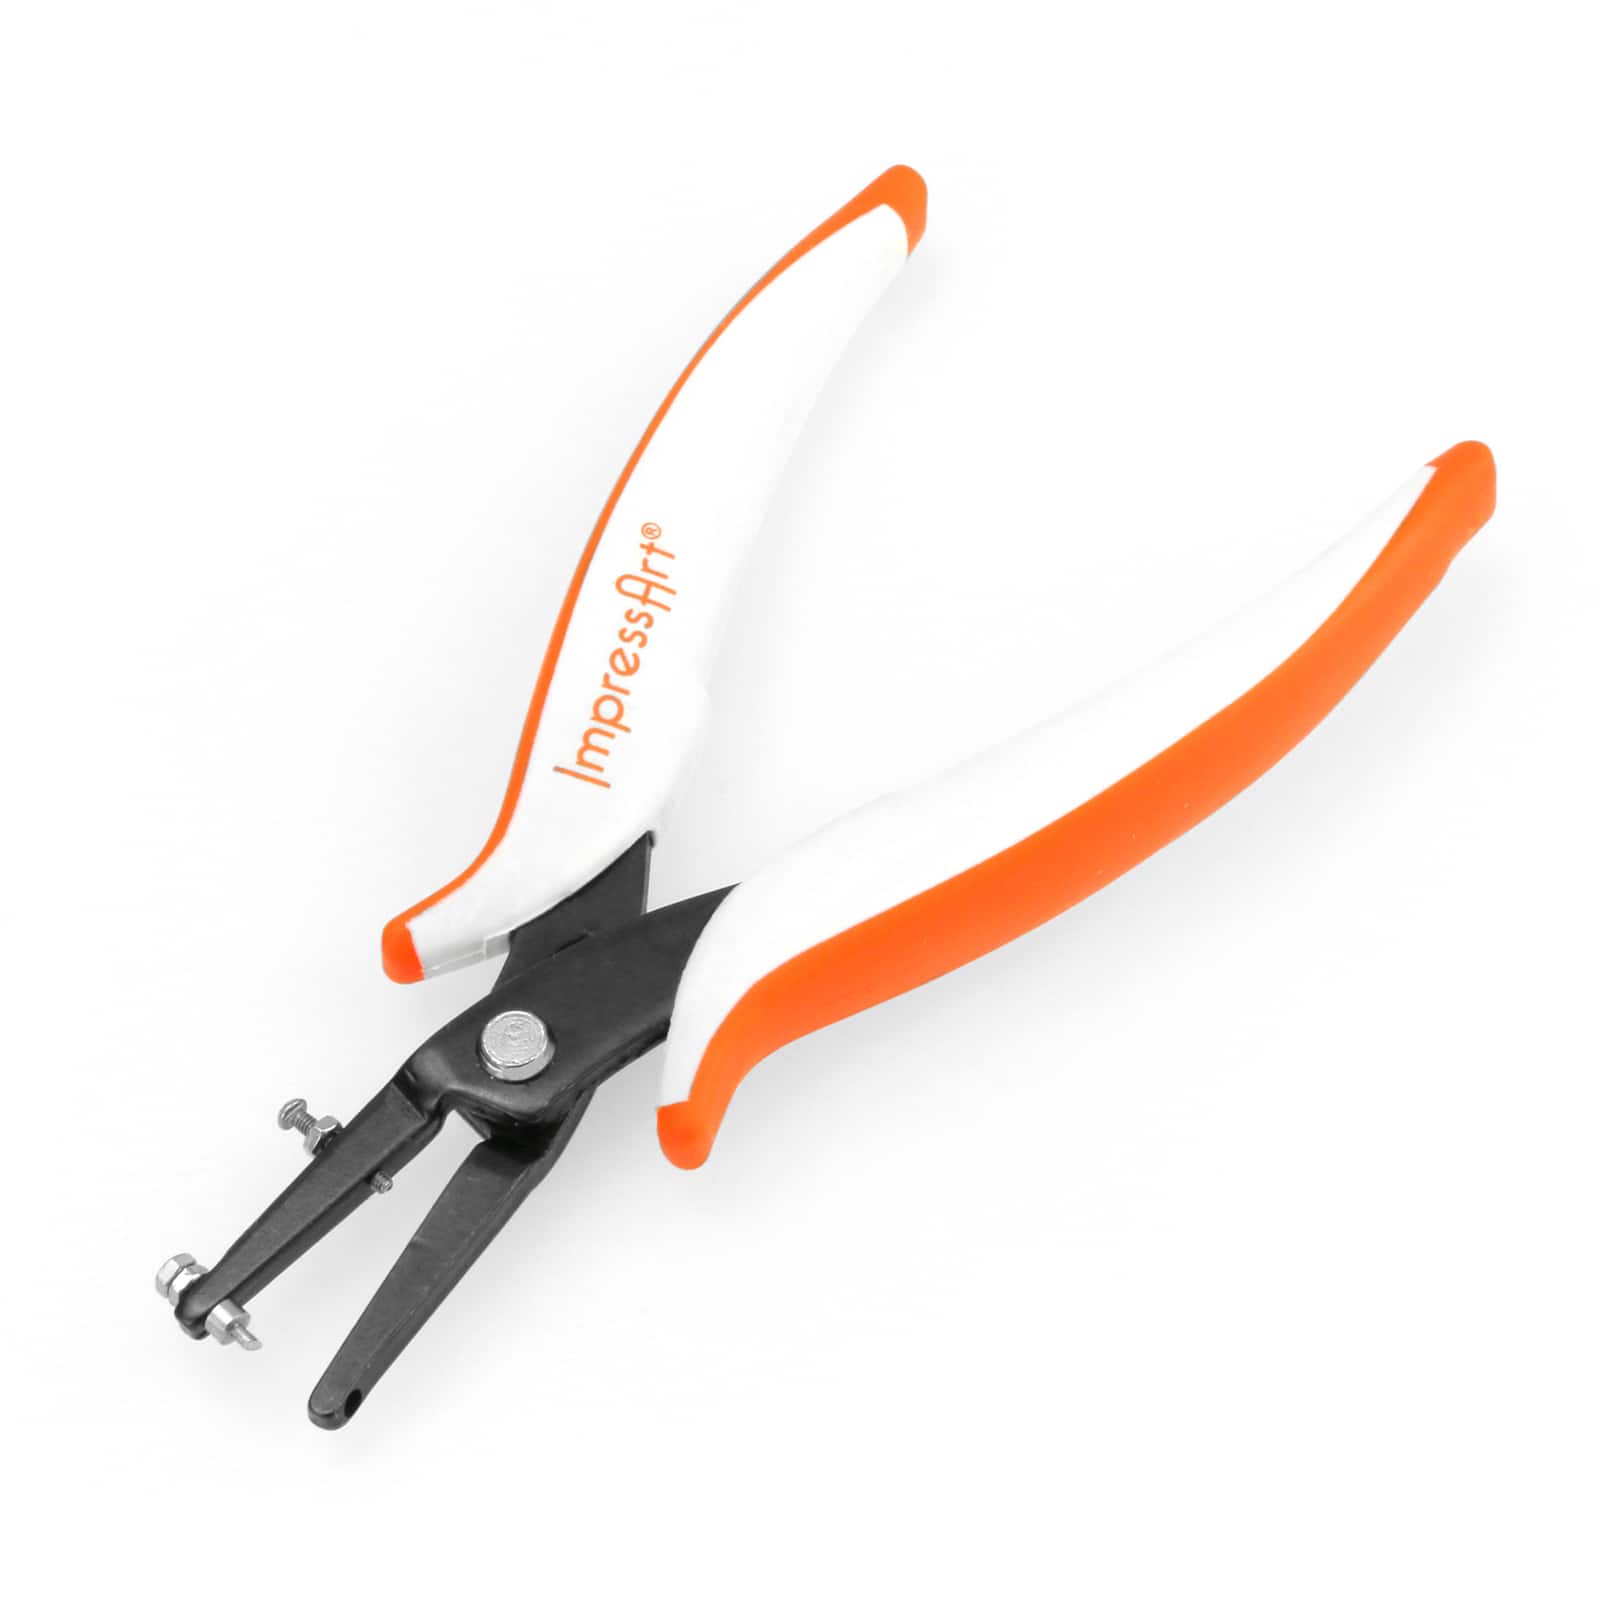  ImpressArt Heart Hole Punch Pliers : Arts, Crafts & Sewing